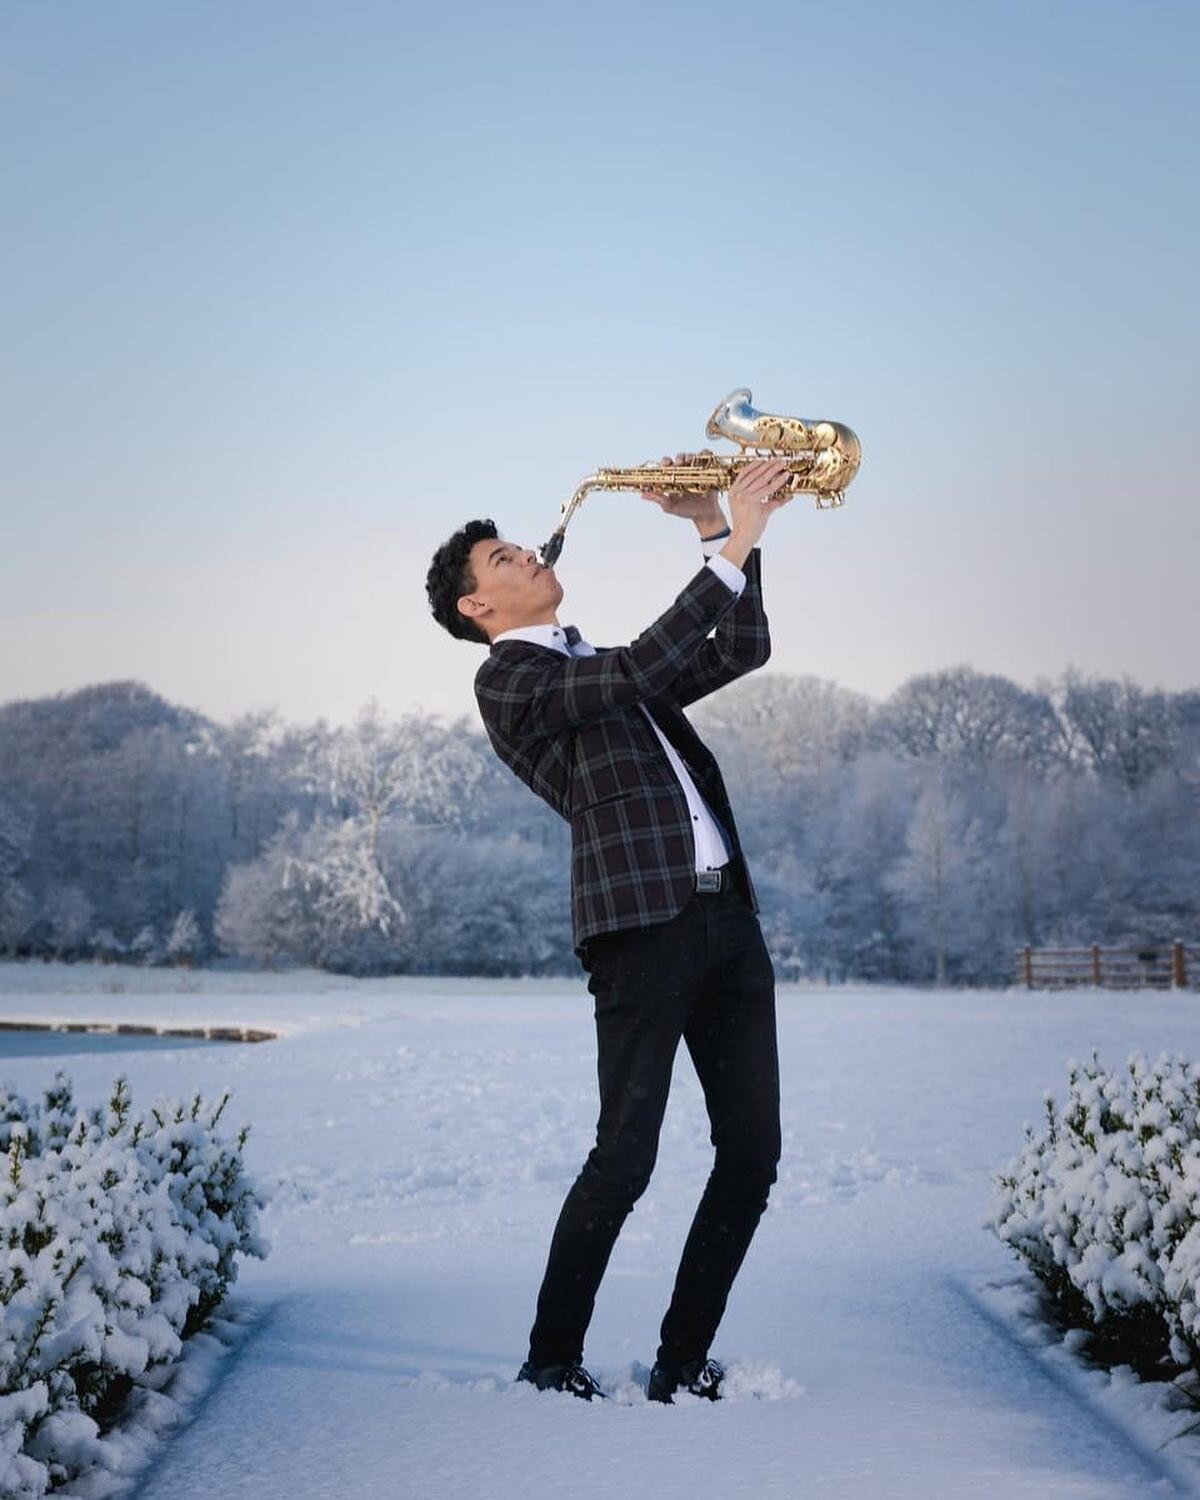 Snow is falling all around me&hellip; 🎶

Absolutely gutted to be missing out this weekends gigs due to getting struck down with the dreaded covid! 🙈

Here&rsquo;s a flashback from a few weeks ago when I decided to be really mean to my saxophone for